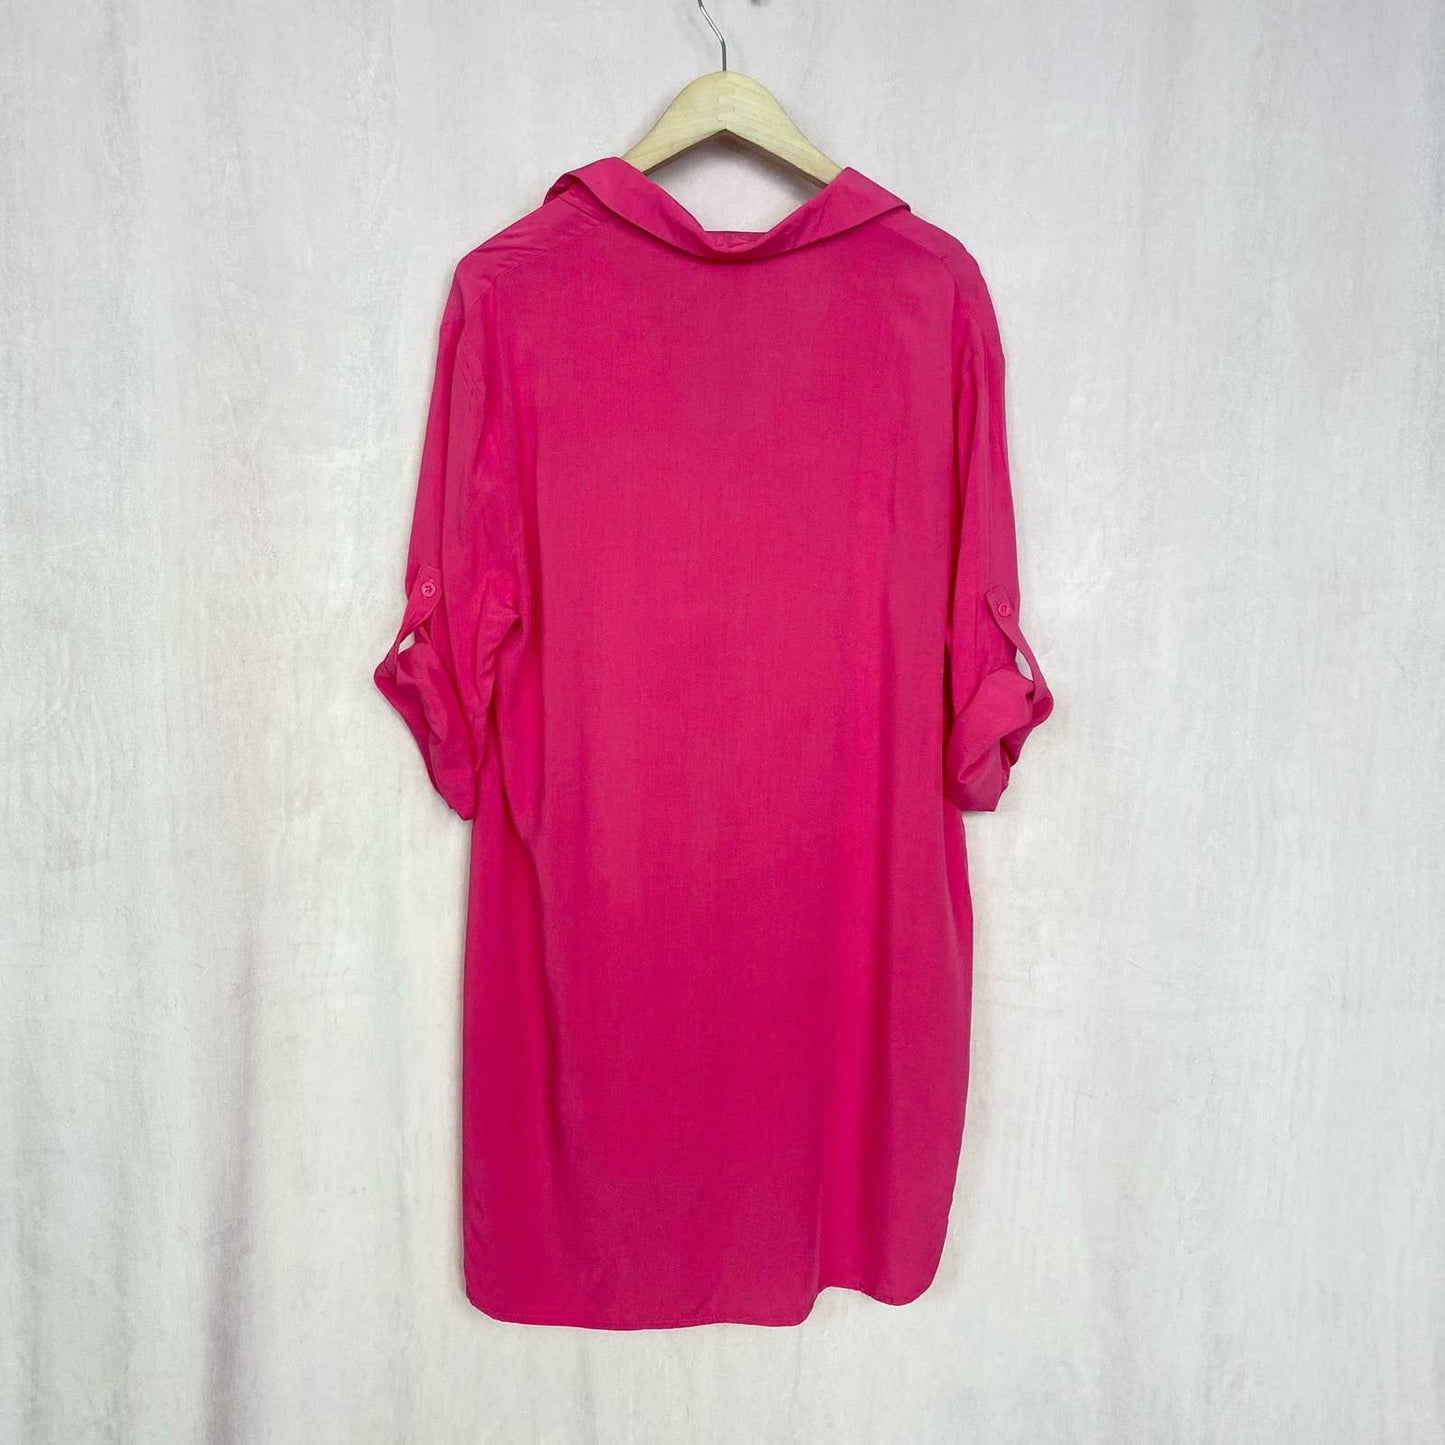 Secondhand Ekouaer Pink Cover Up Shirt for Beach Swimsuit, Size Medium